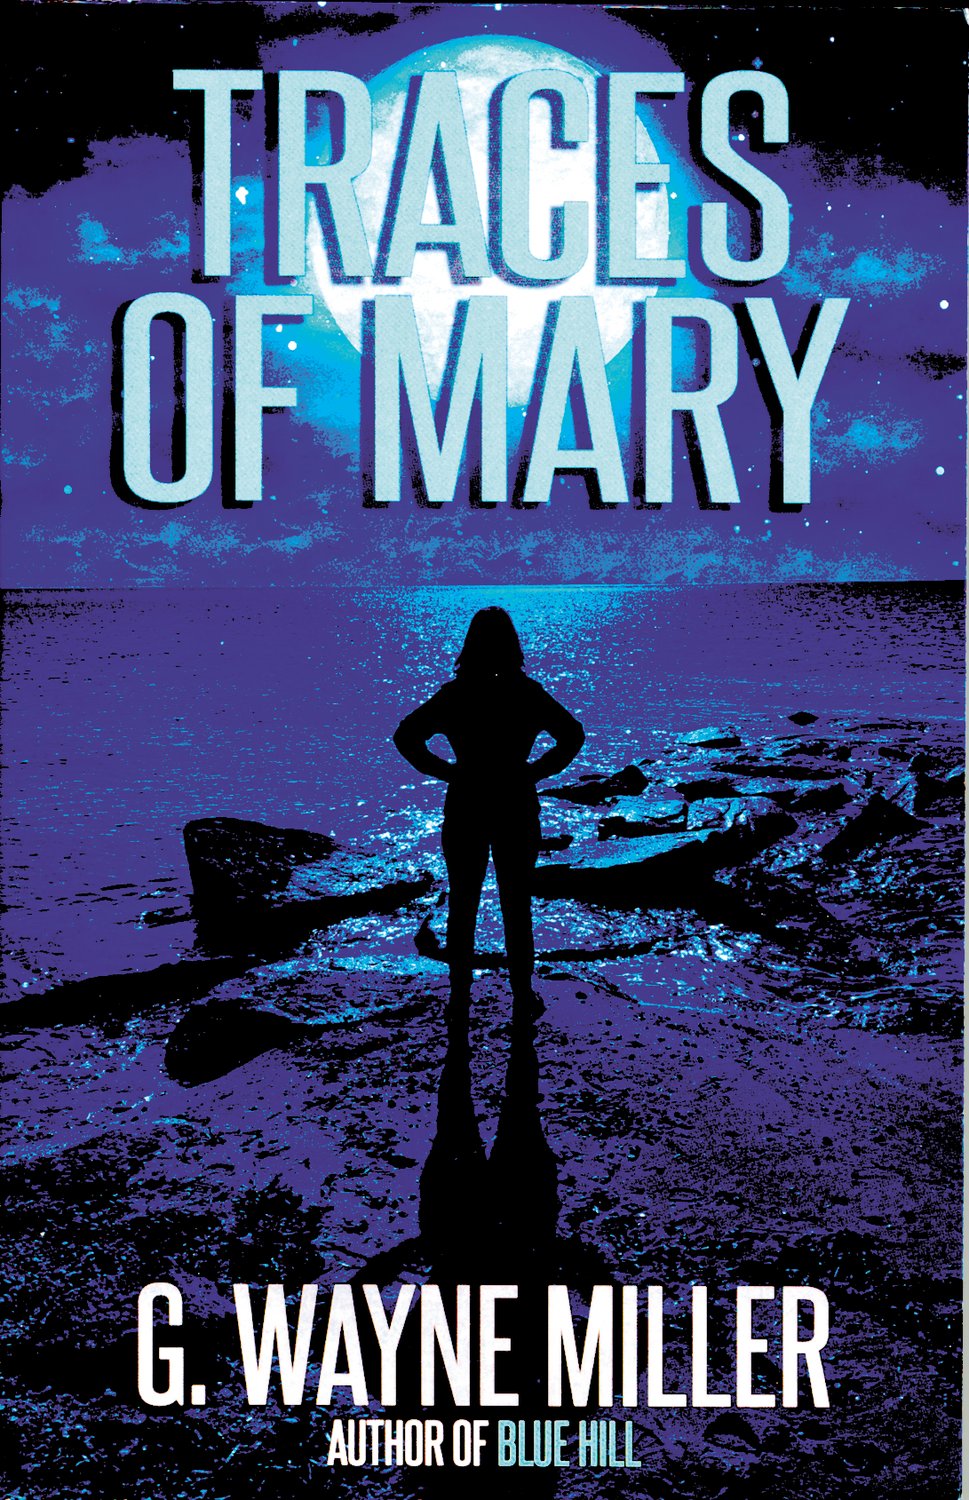 “Traces of Mary” is available at Amazon.com.